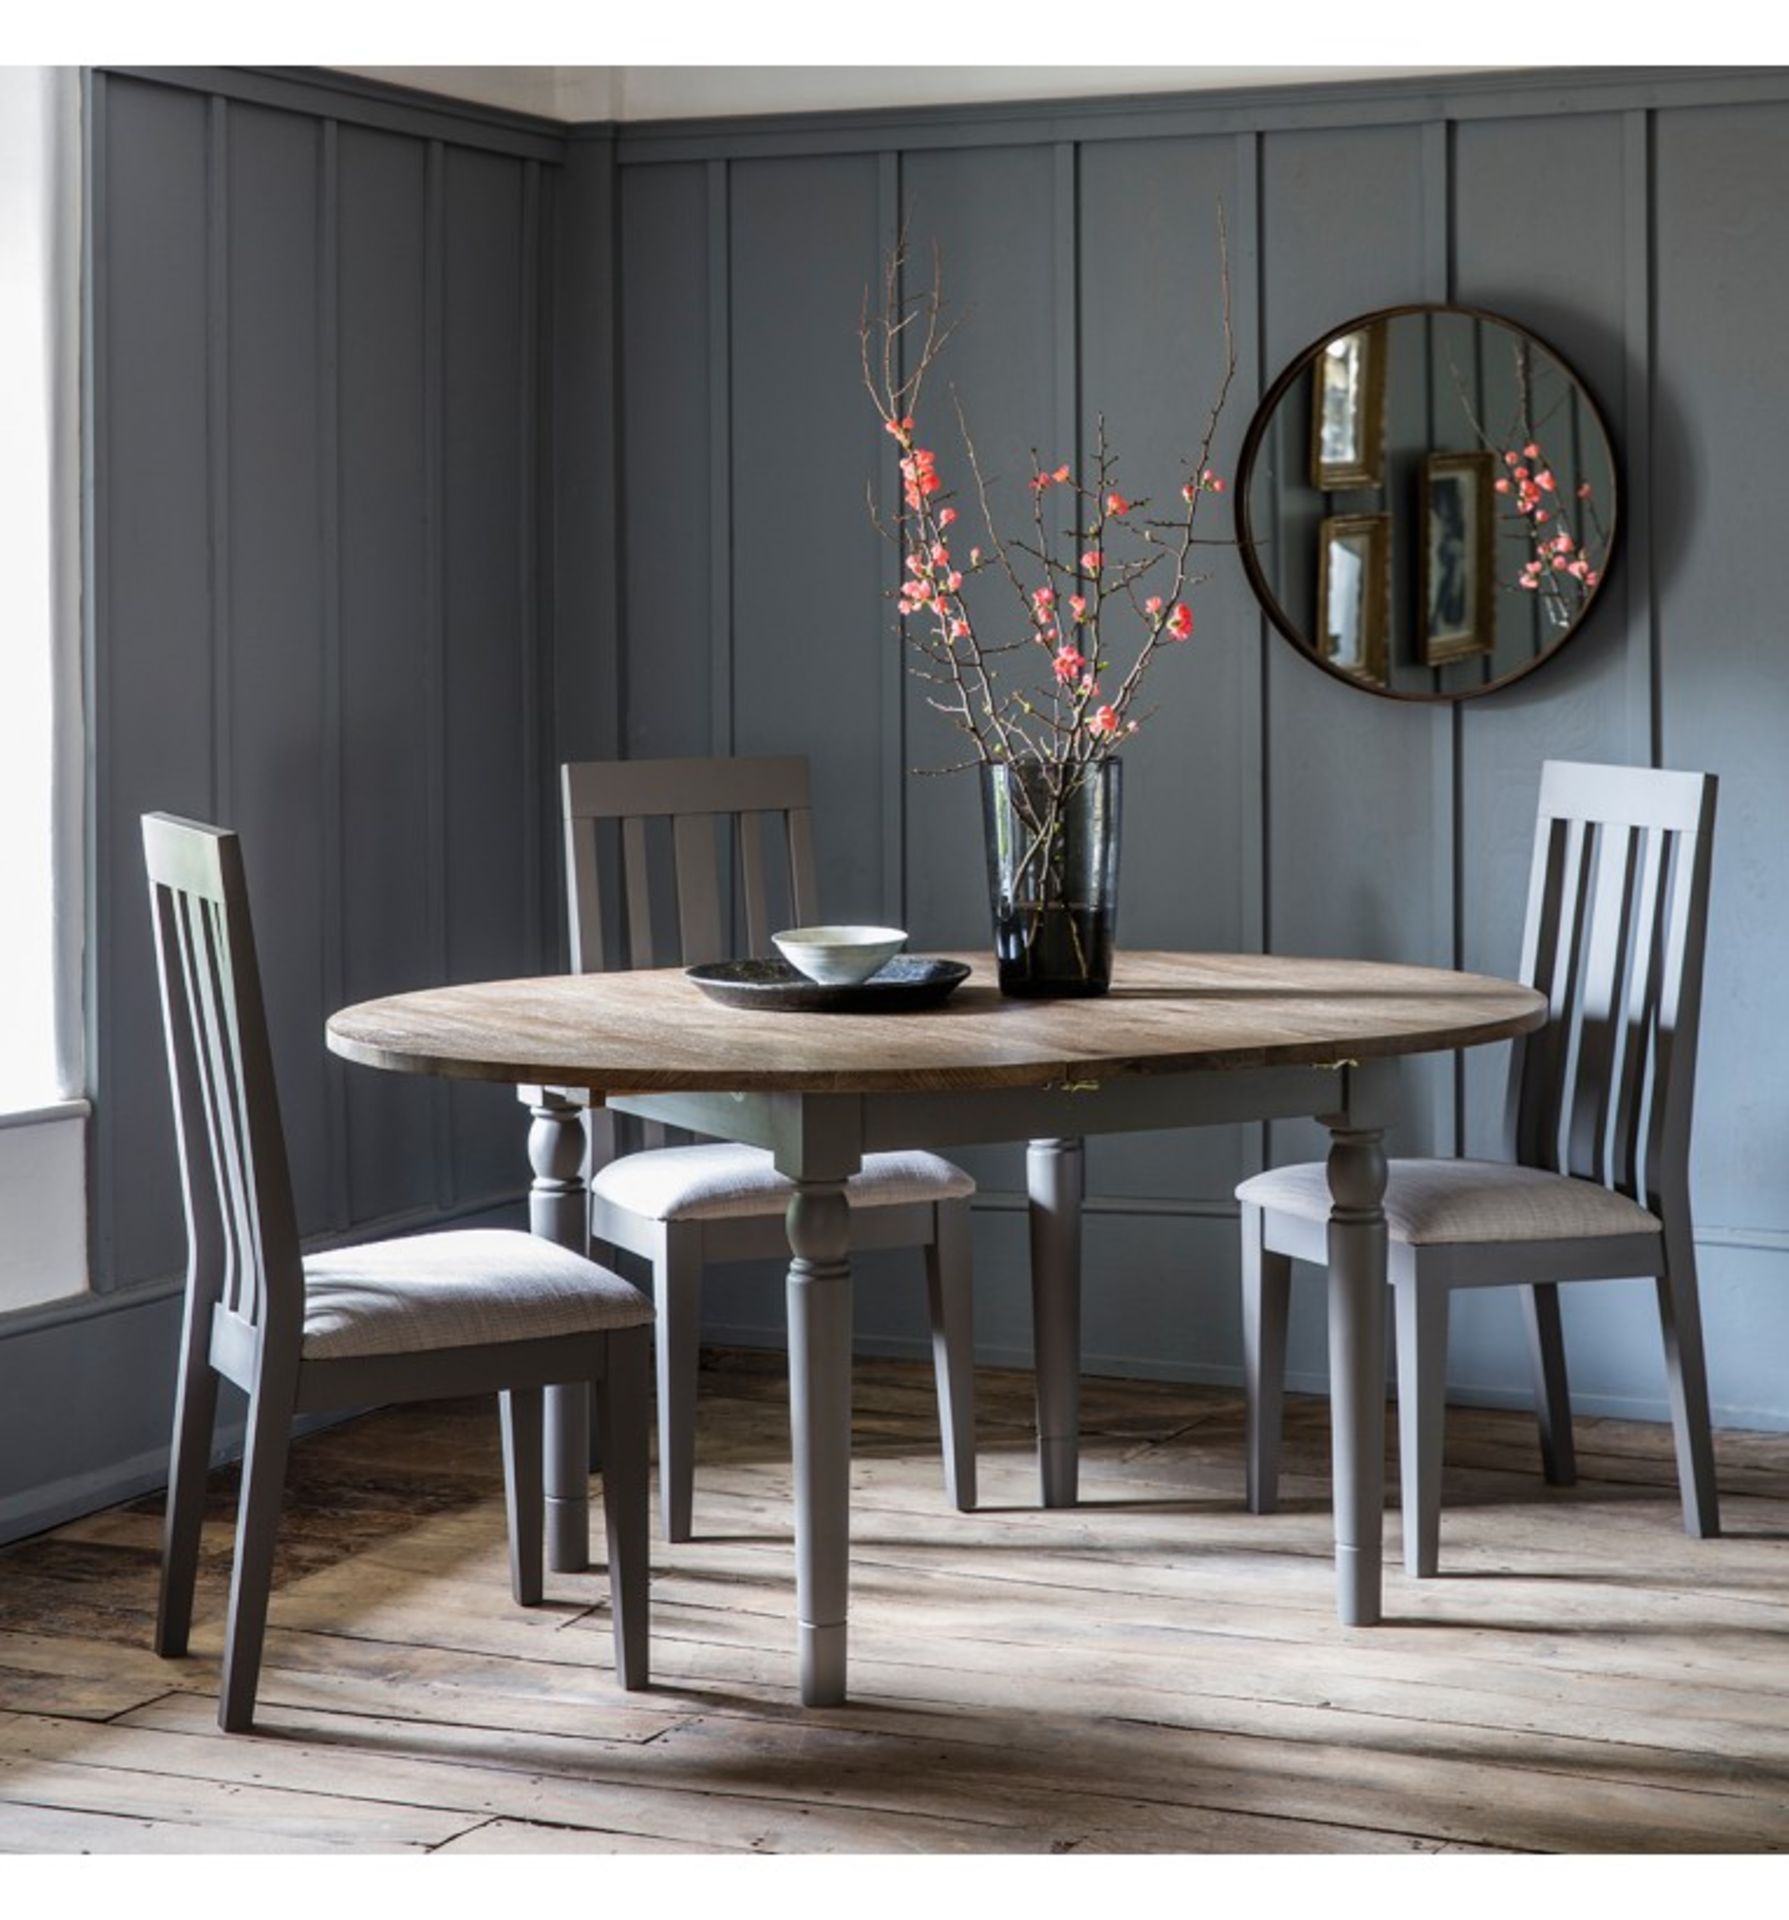 Cookham Round Extending Dining Table Grey A Butterfly Leaf Table Extending To 1550mm, Seating Up - Bild 4 aus 4